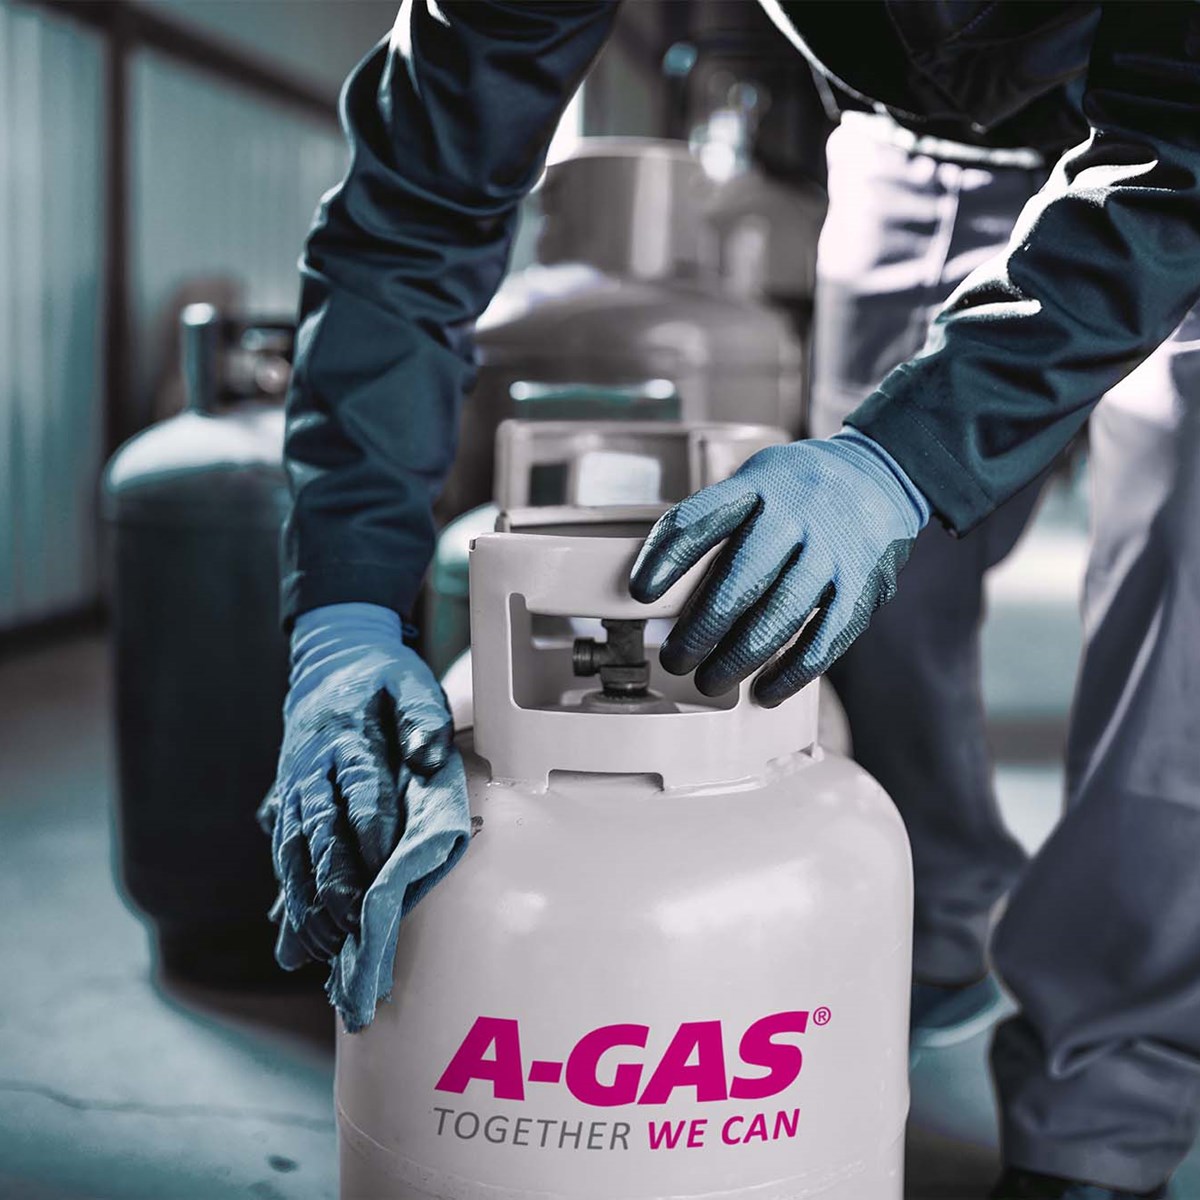 Cyclopentane Refrigerant R134a R600a R 600 Gas Price Suppliers,  Manufacturers, Factory - Buy Refrigerant Gas, Price & Quotation - Juda  Trading